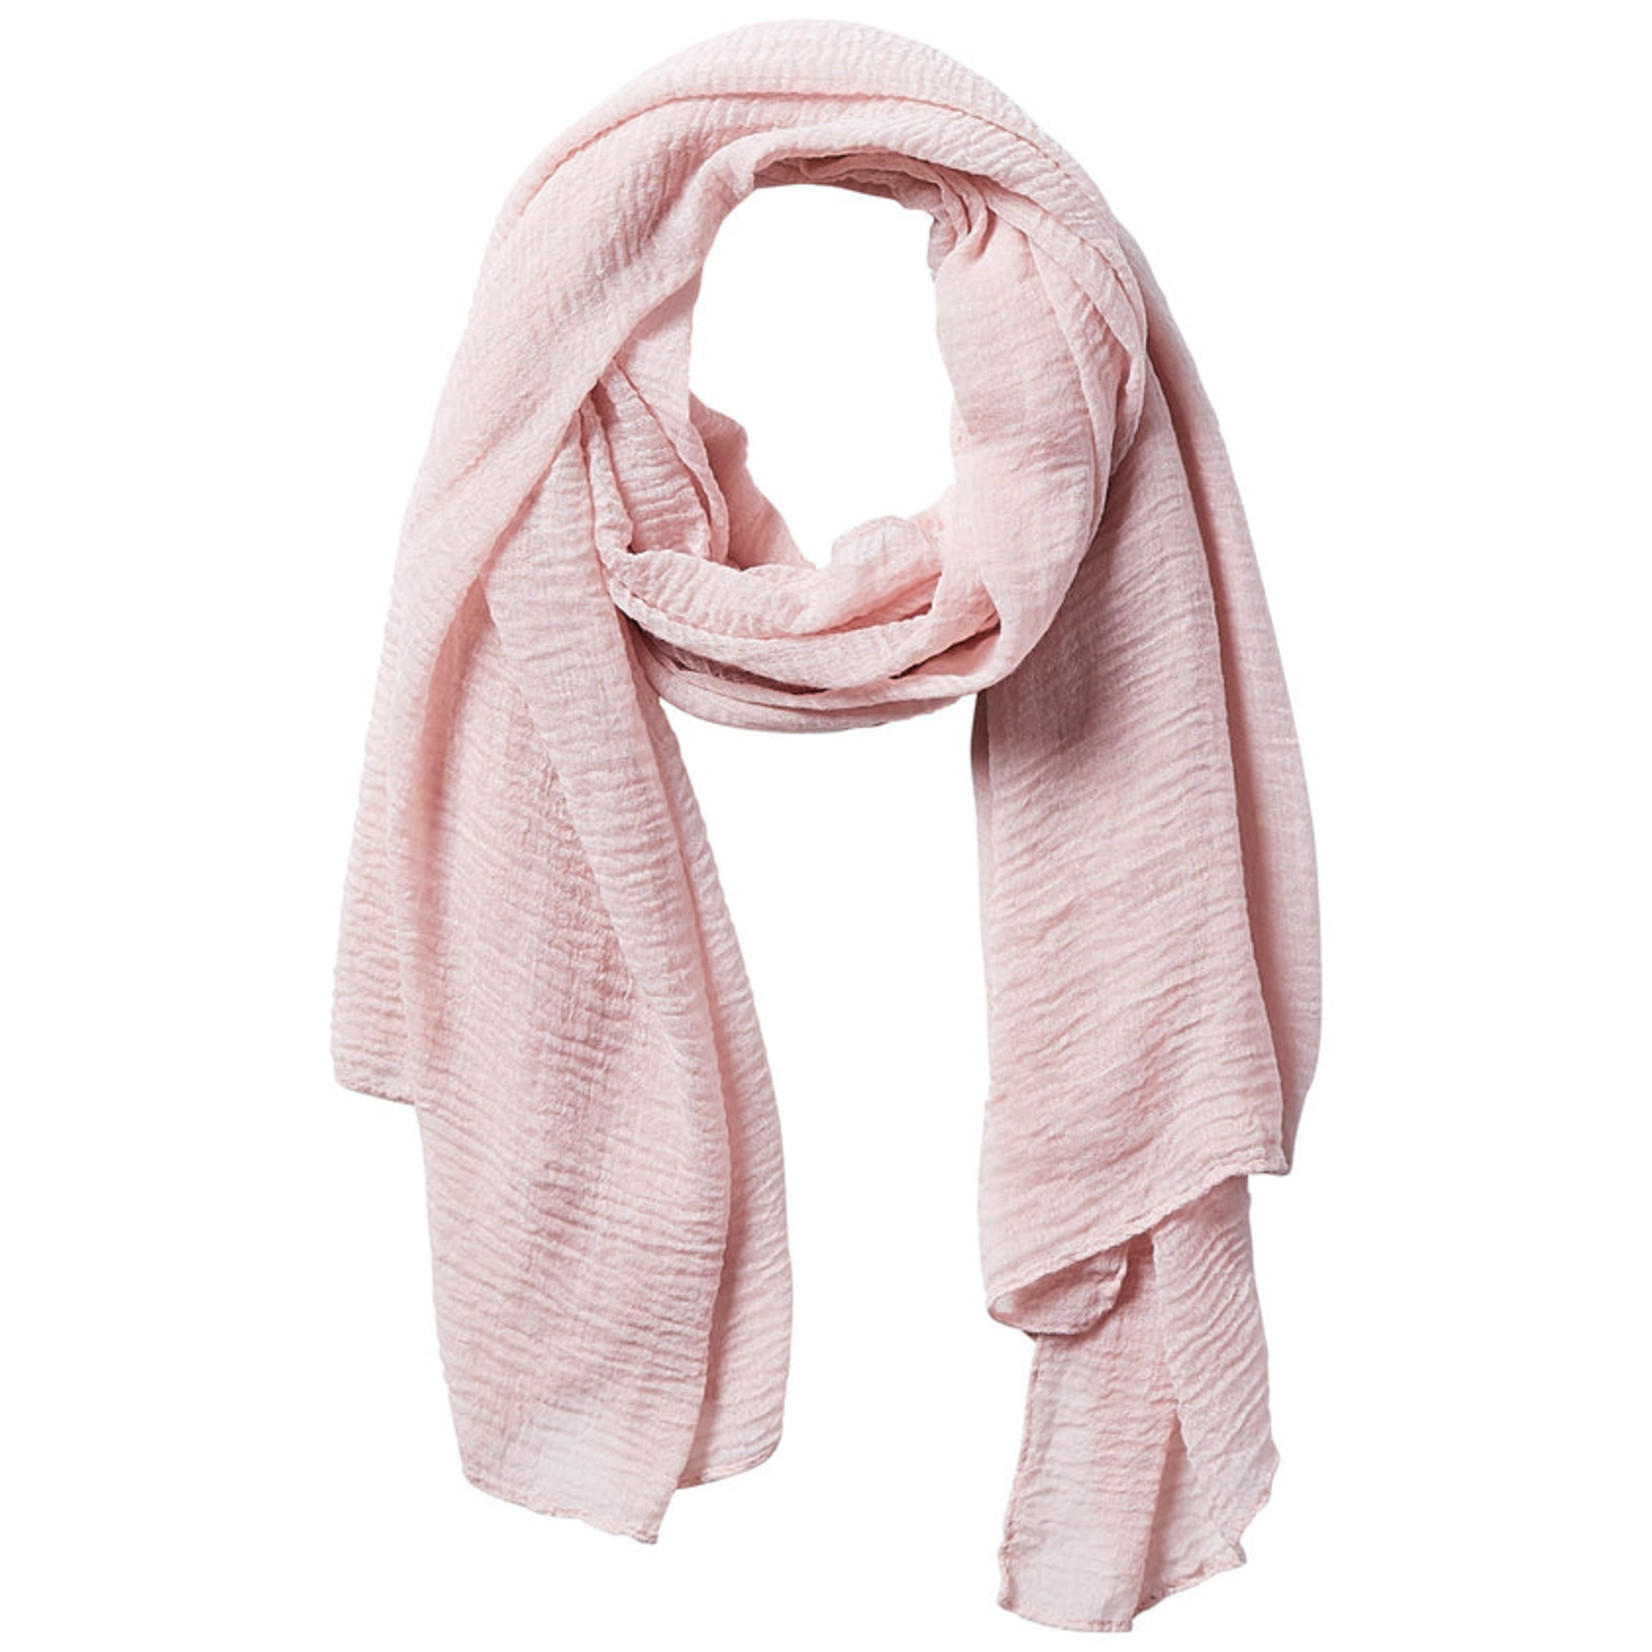 Hadley Wren - Insect Shield Scarf - Light Pink